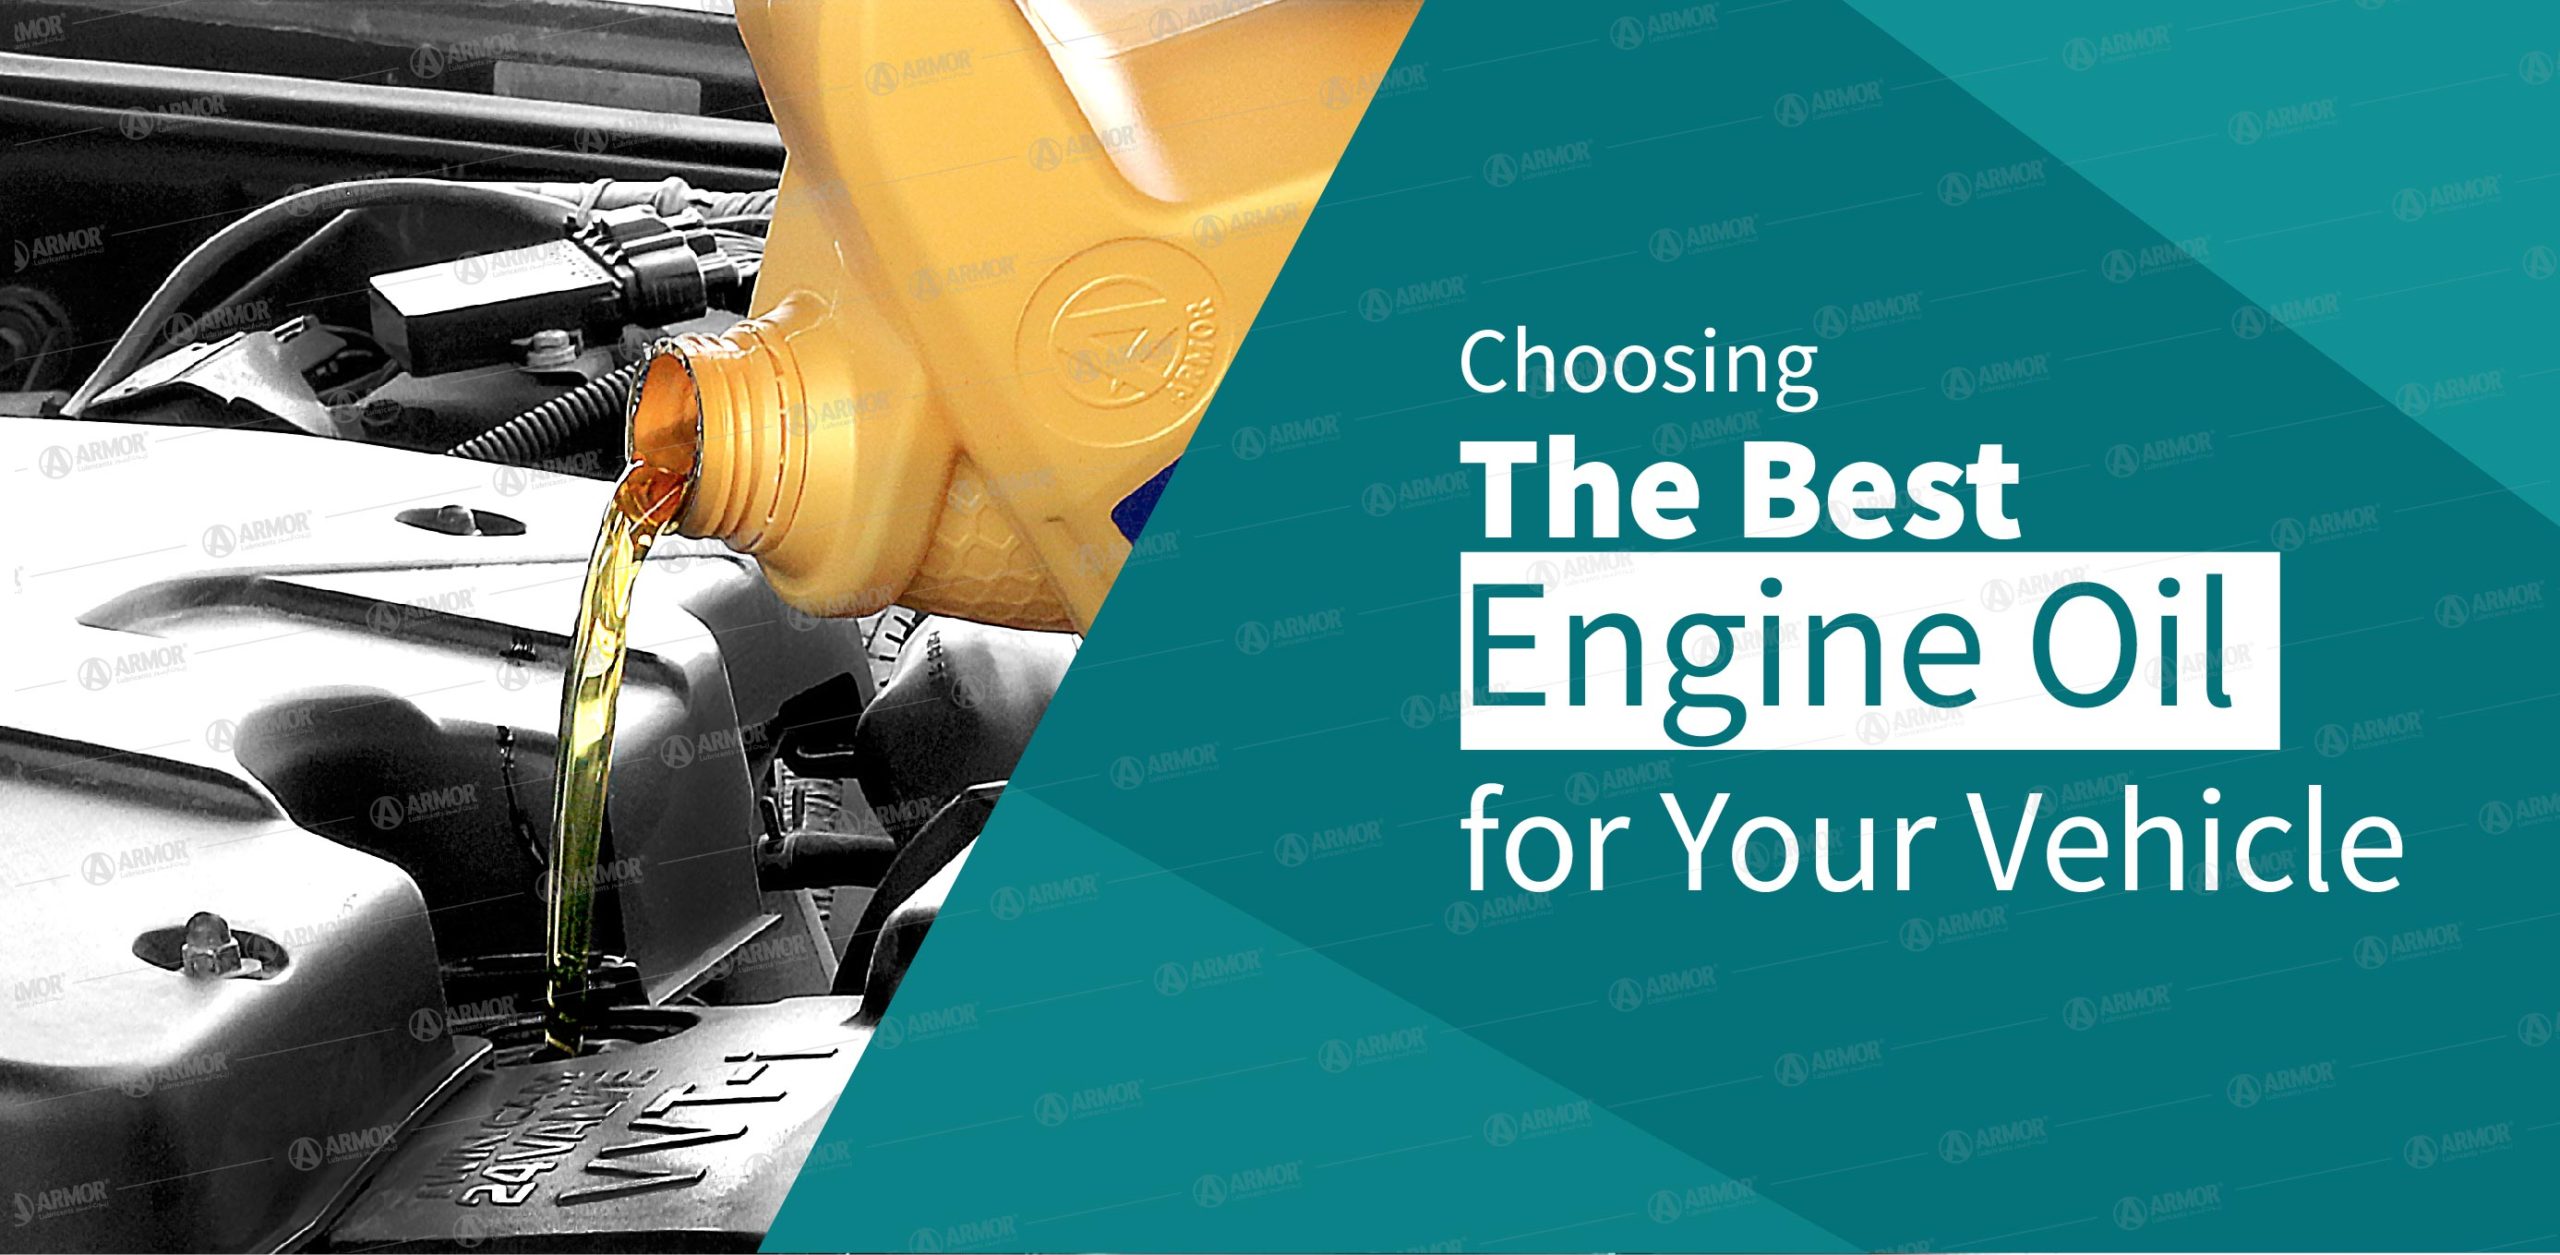 Choosing the best engine oil for your vehicle